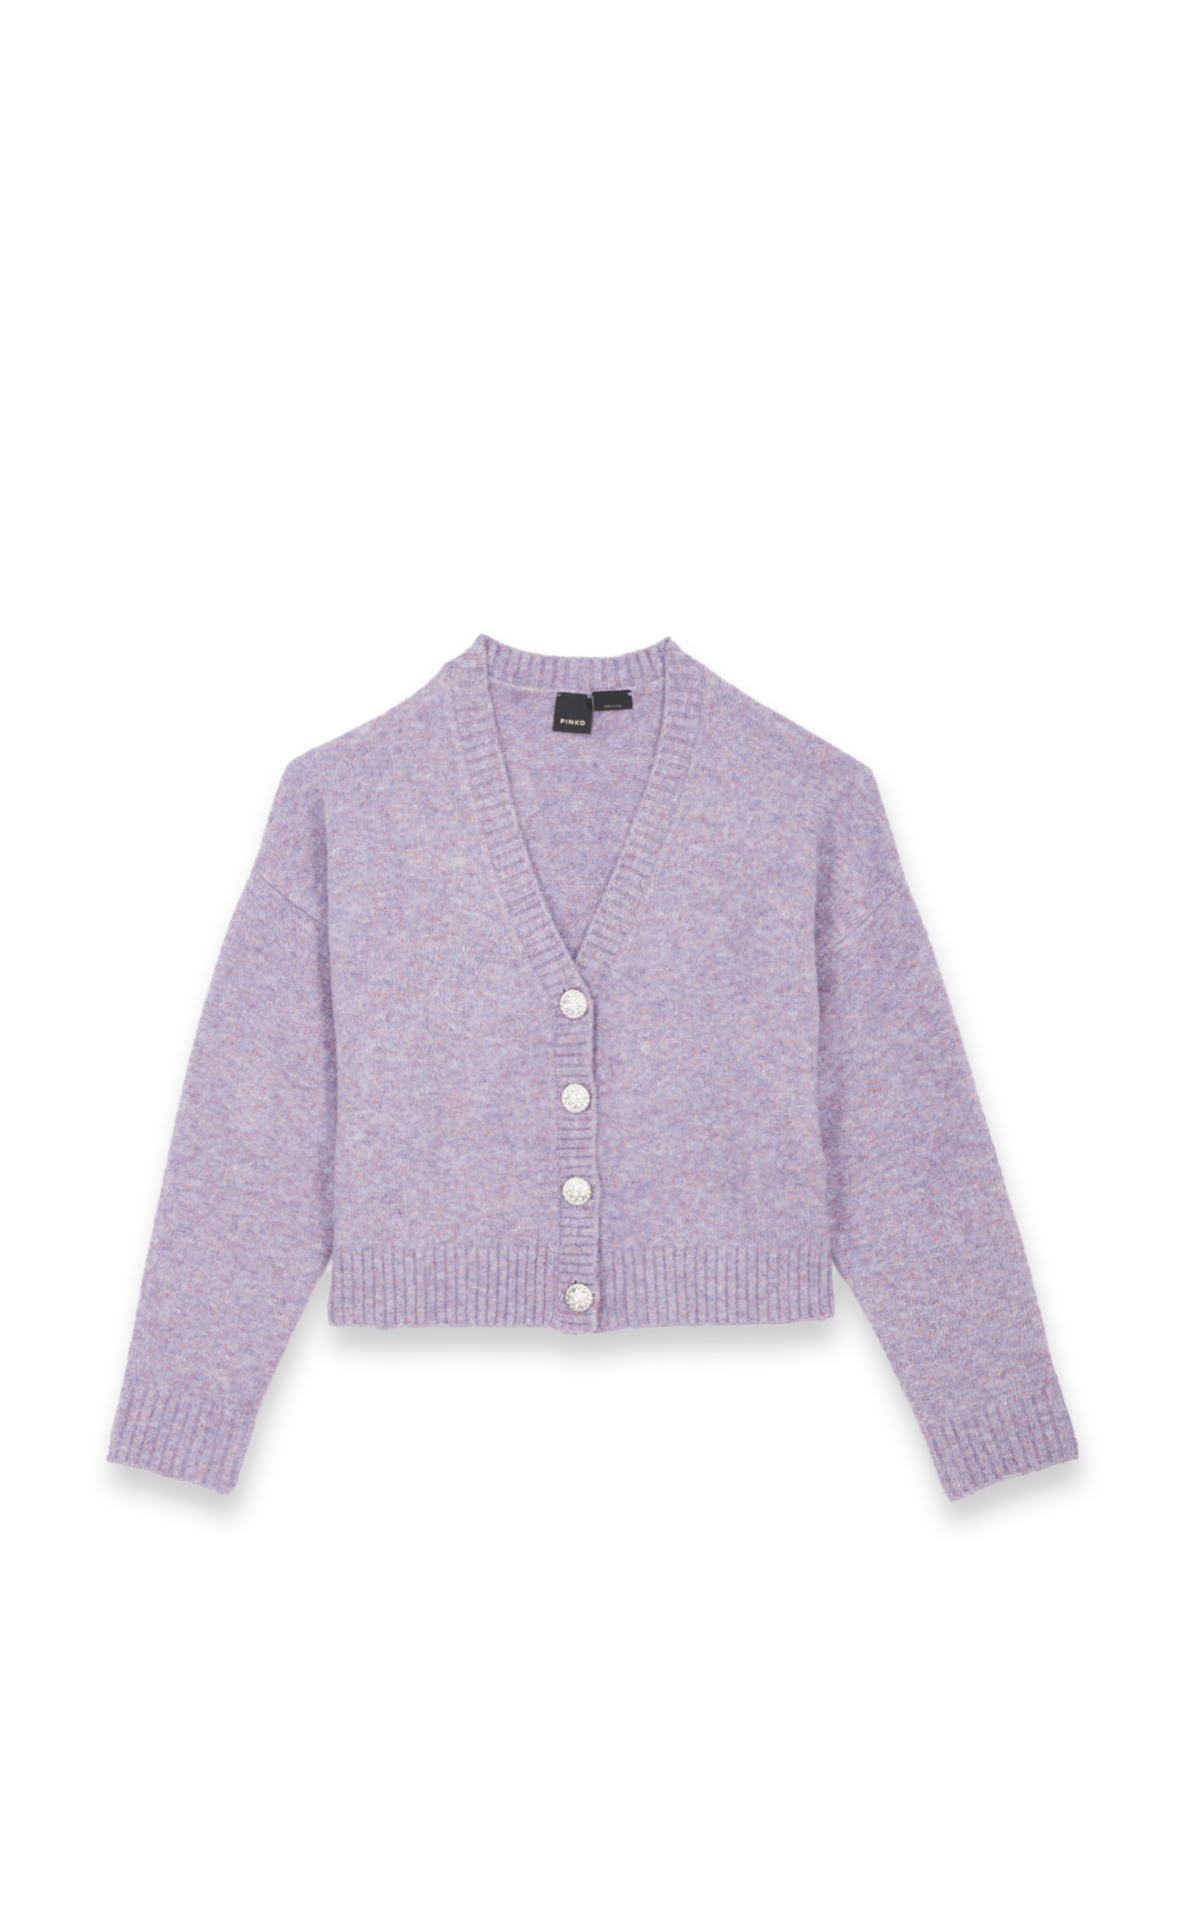 Lilac cropped cardigan with ornamental buttons*